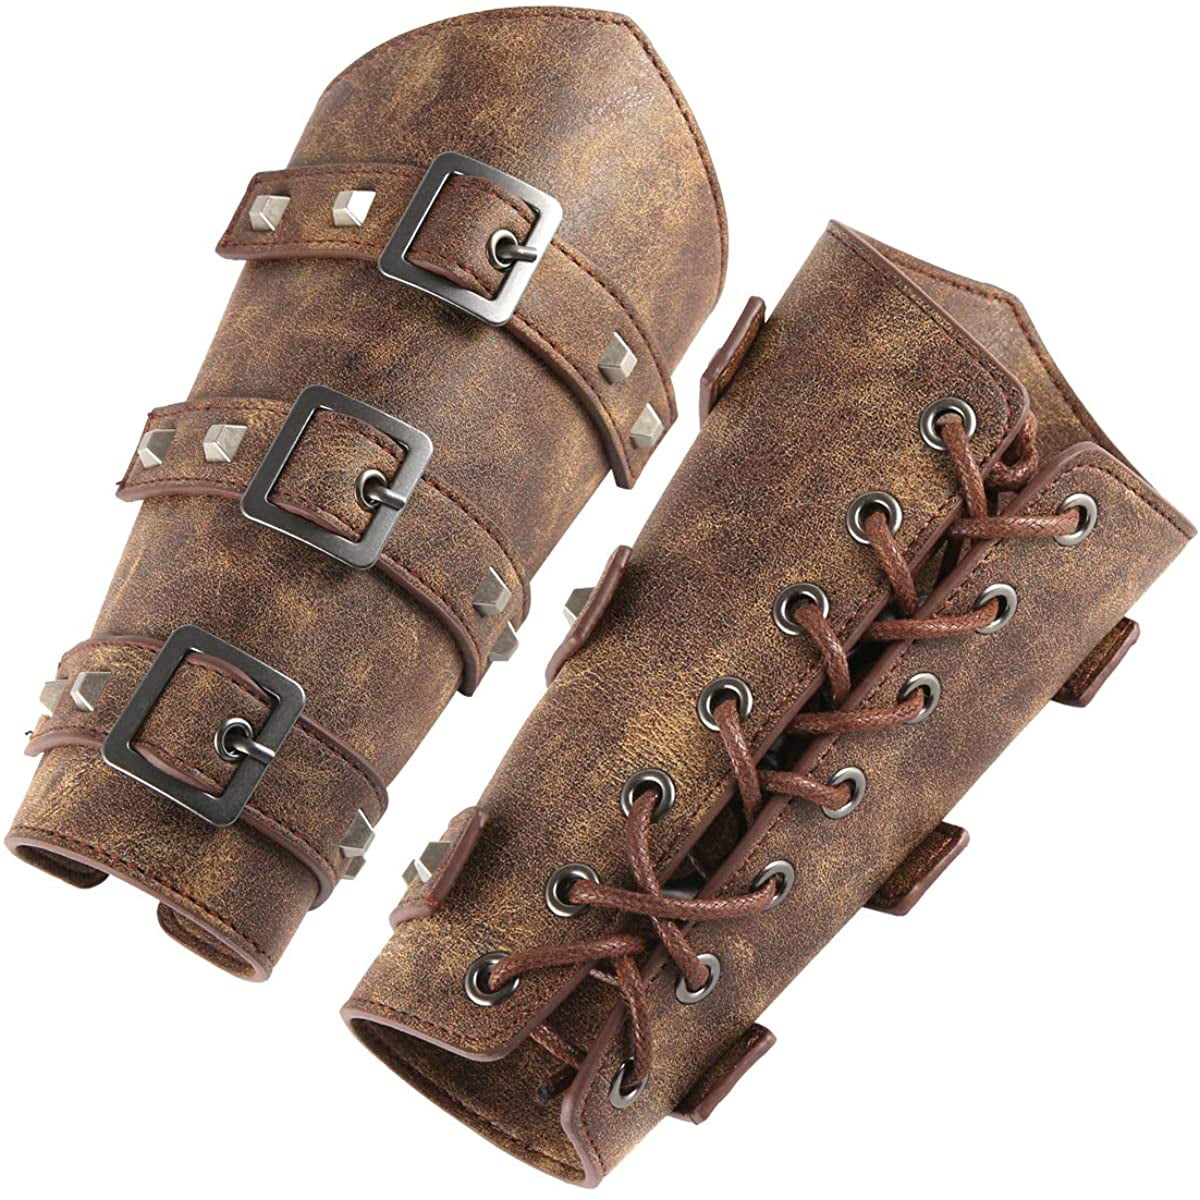 KOTTO Adults Faux Leather Arm Guards Medieval Belt Leather Buckle Bracers 2 Pieces Halloween Adult Buckle Bracers Knight Armband Costume Retro Wristband for Men Women 